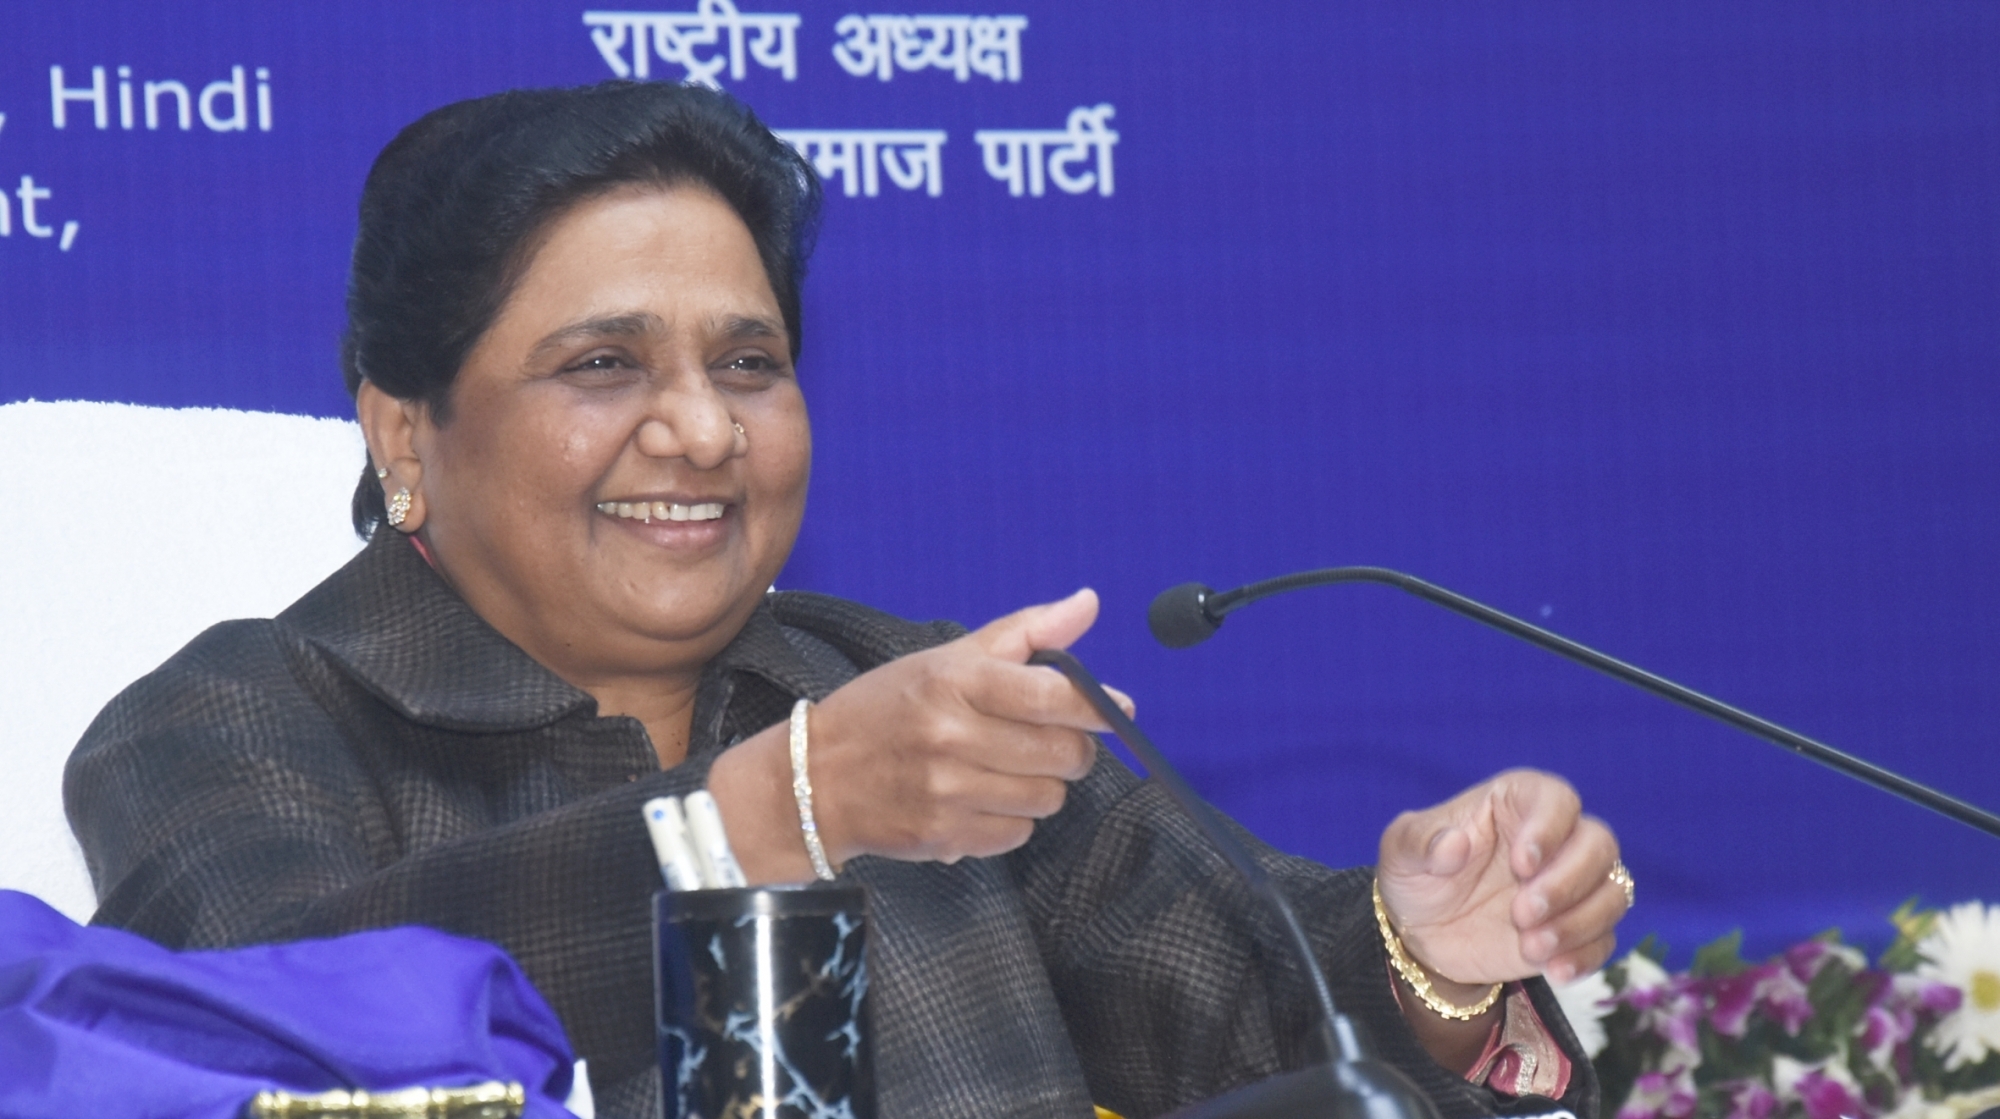 Mayawati has to pay public money spent on her statues, elephant: SC